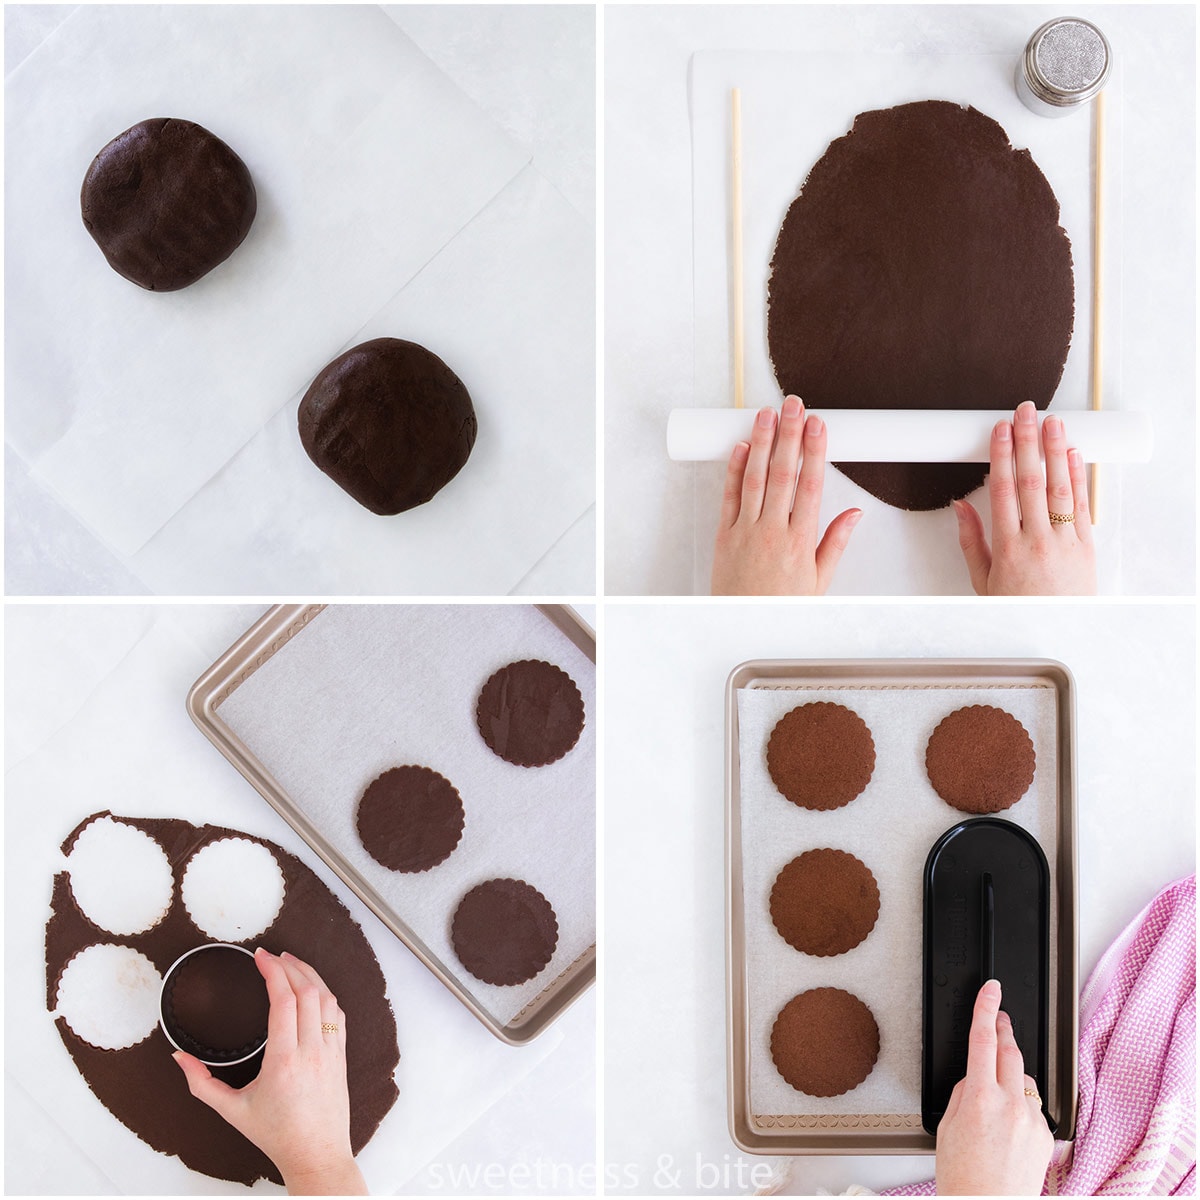 Collage of four images showing the dough balls being rolled out, scalloped circle cookies being cut out and baked.